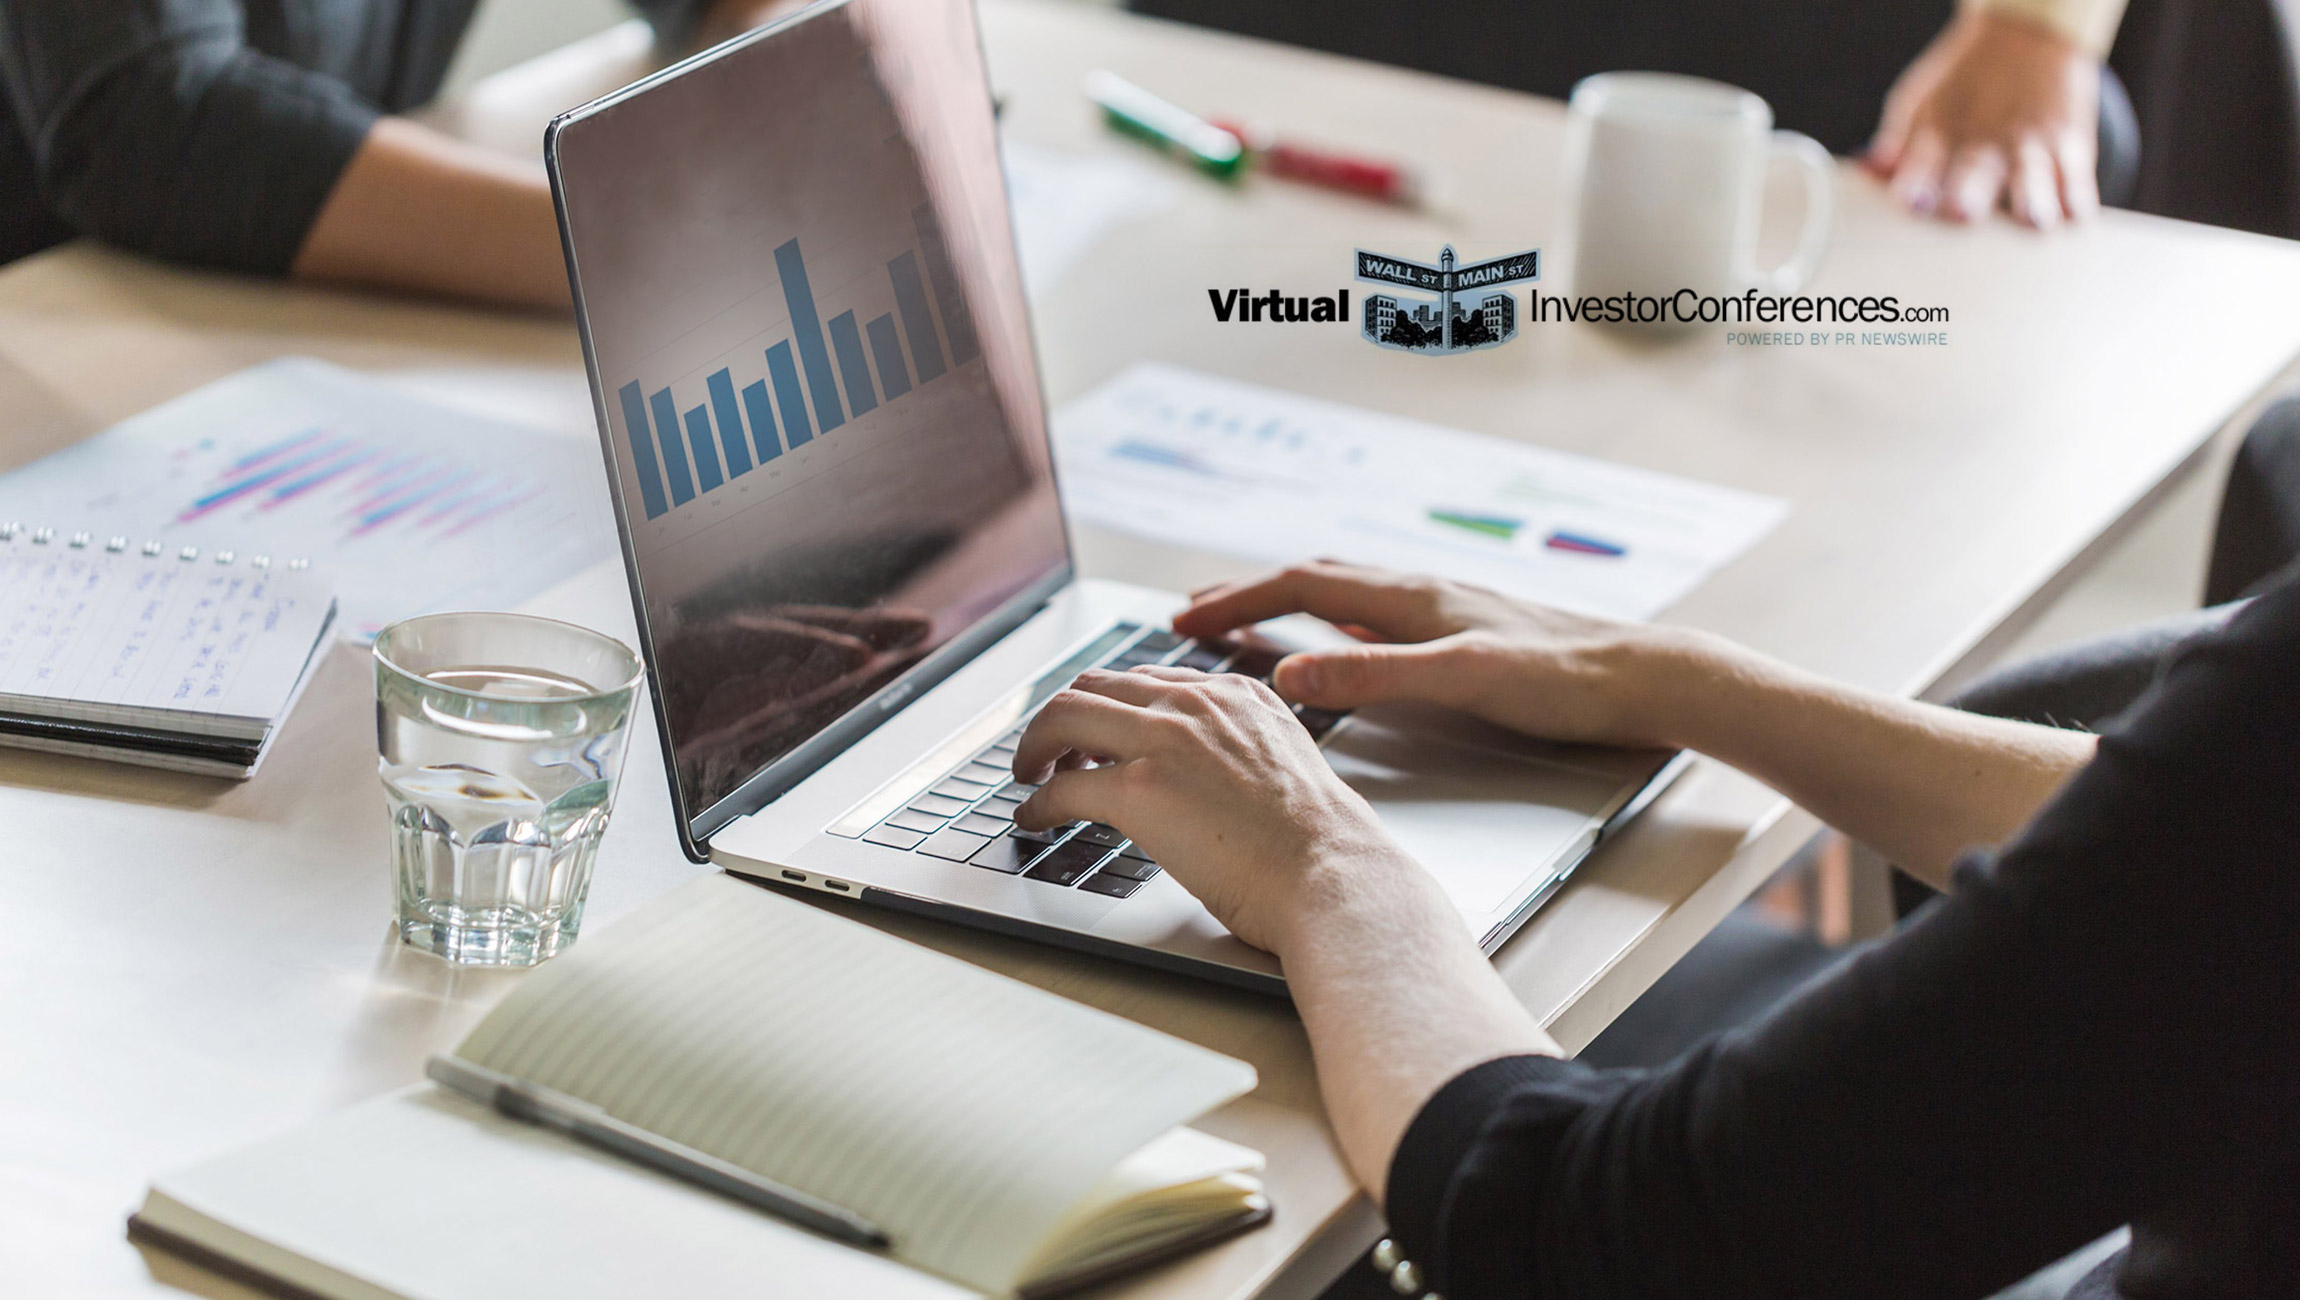 Engagement Labs' Ed Keller to Webcast Live at Virtual Investor Conferences Series on July 12